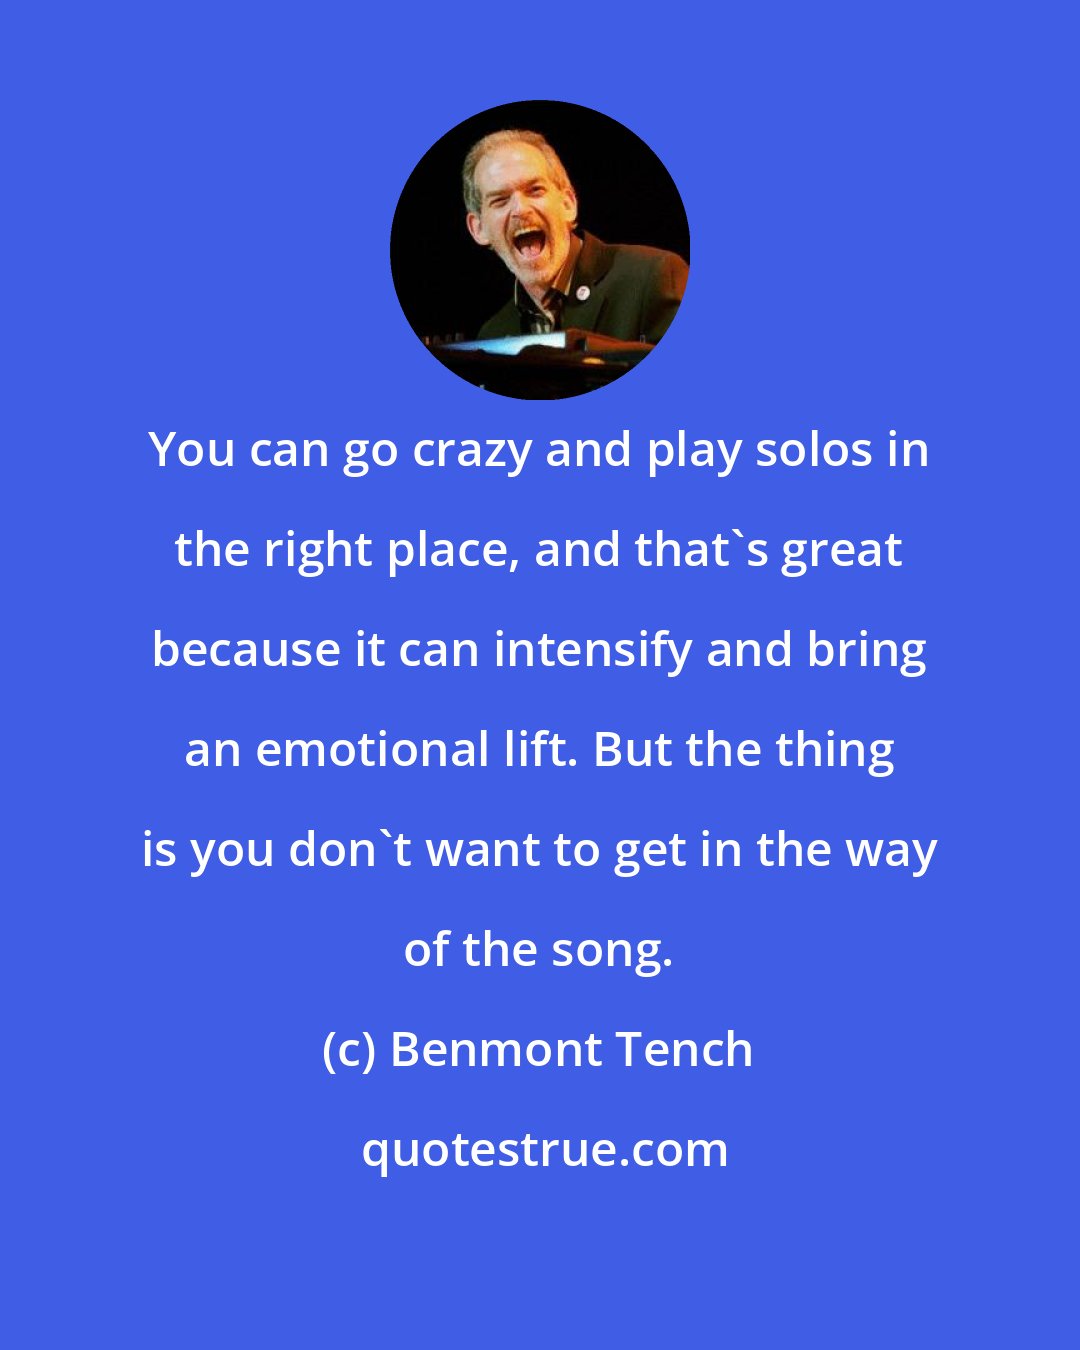 Benmont Tench: You can go crazy and play solos in the right place, and that's great because it can intensify and bring an emotional lift. But the thing is you don't want to get in the way of the song.